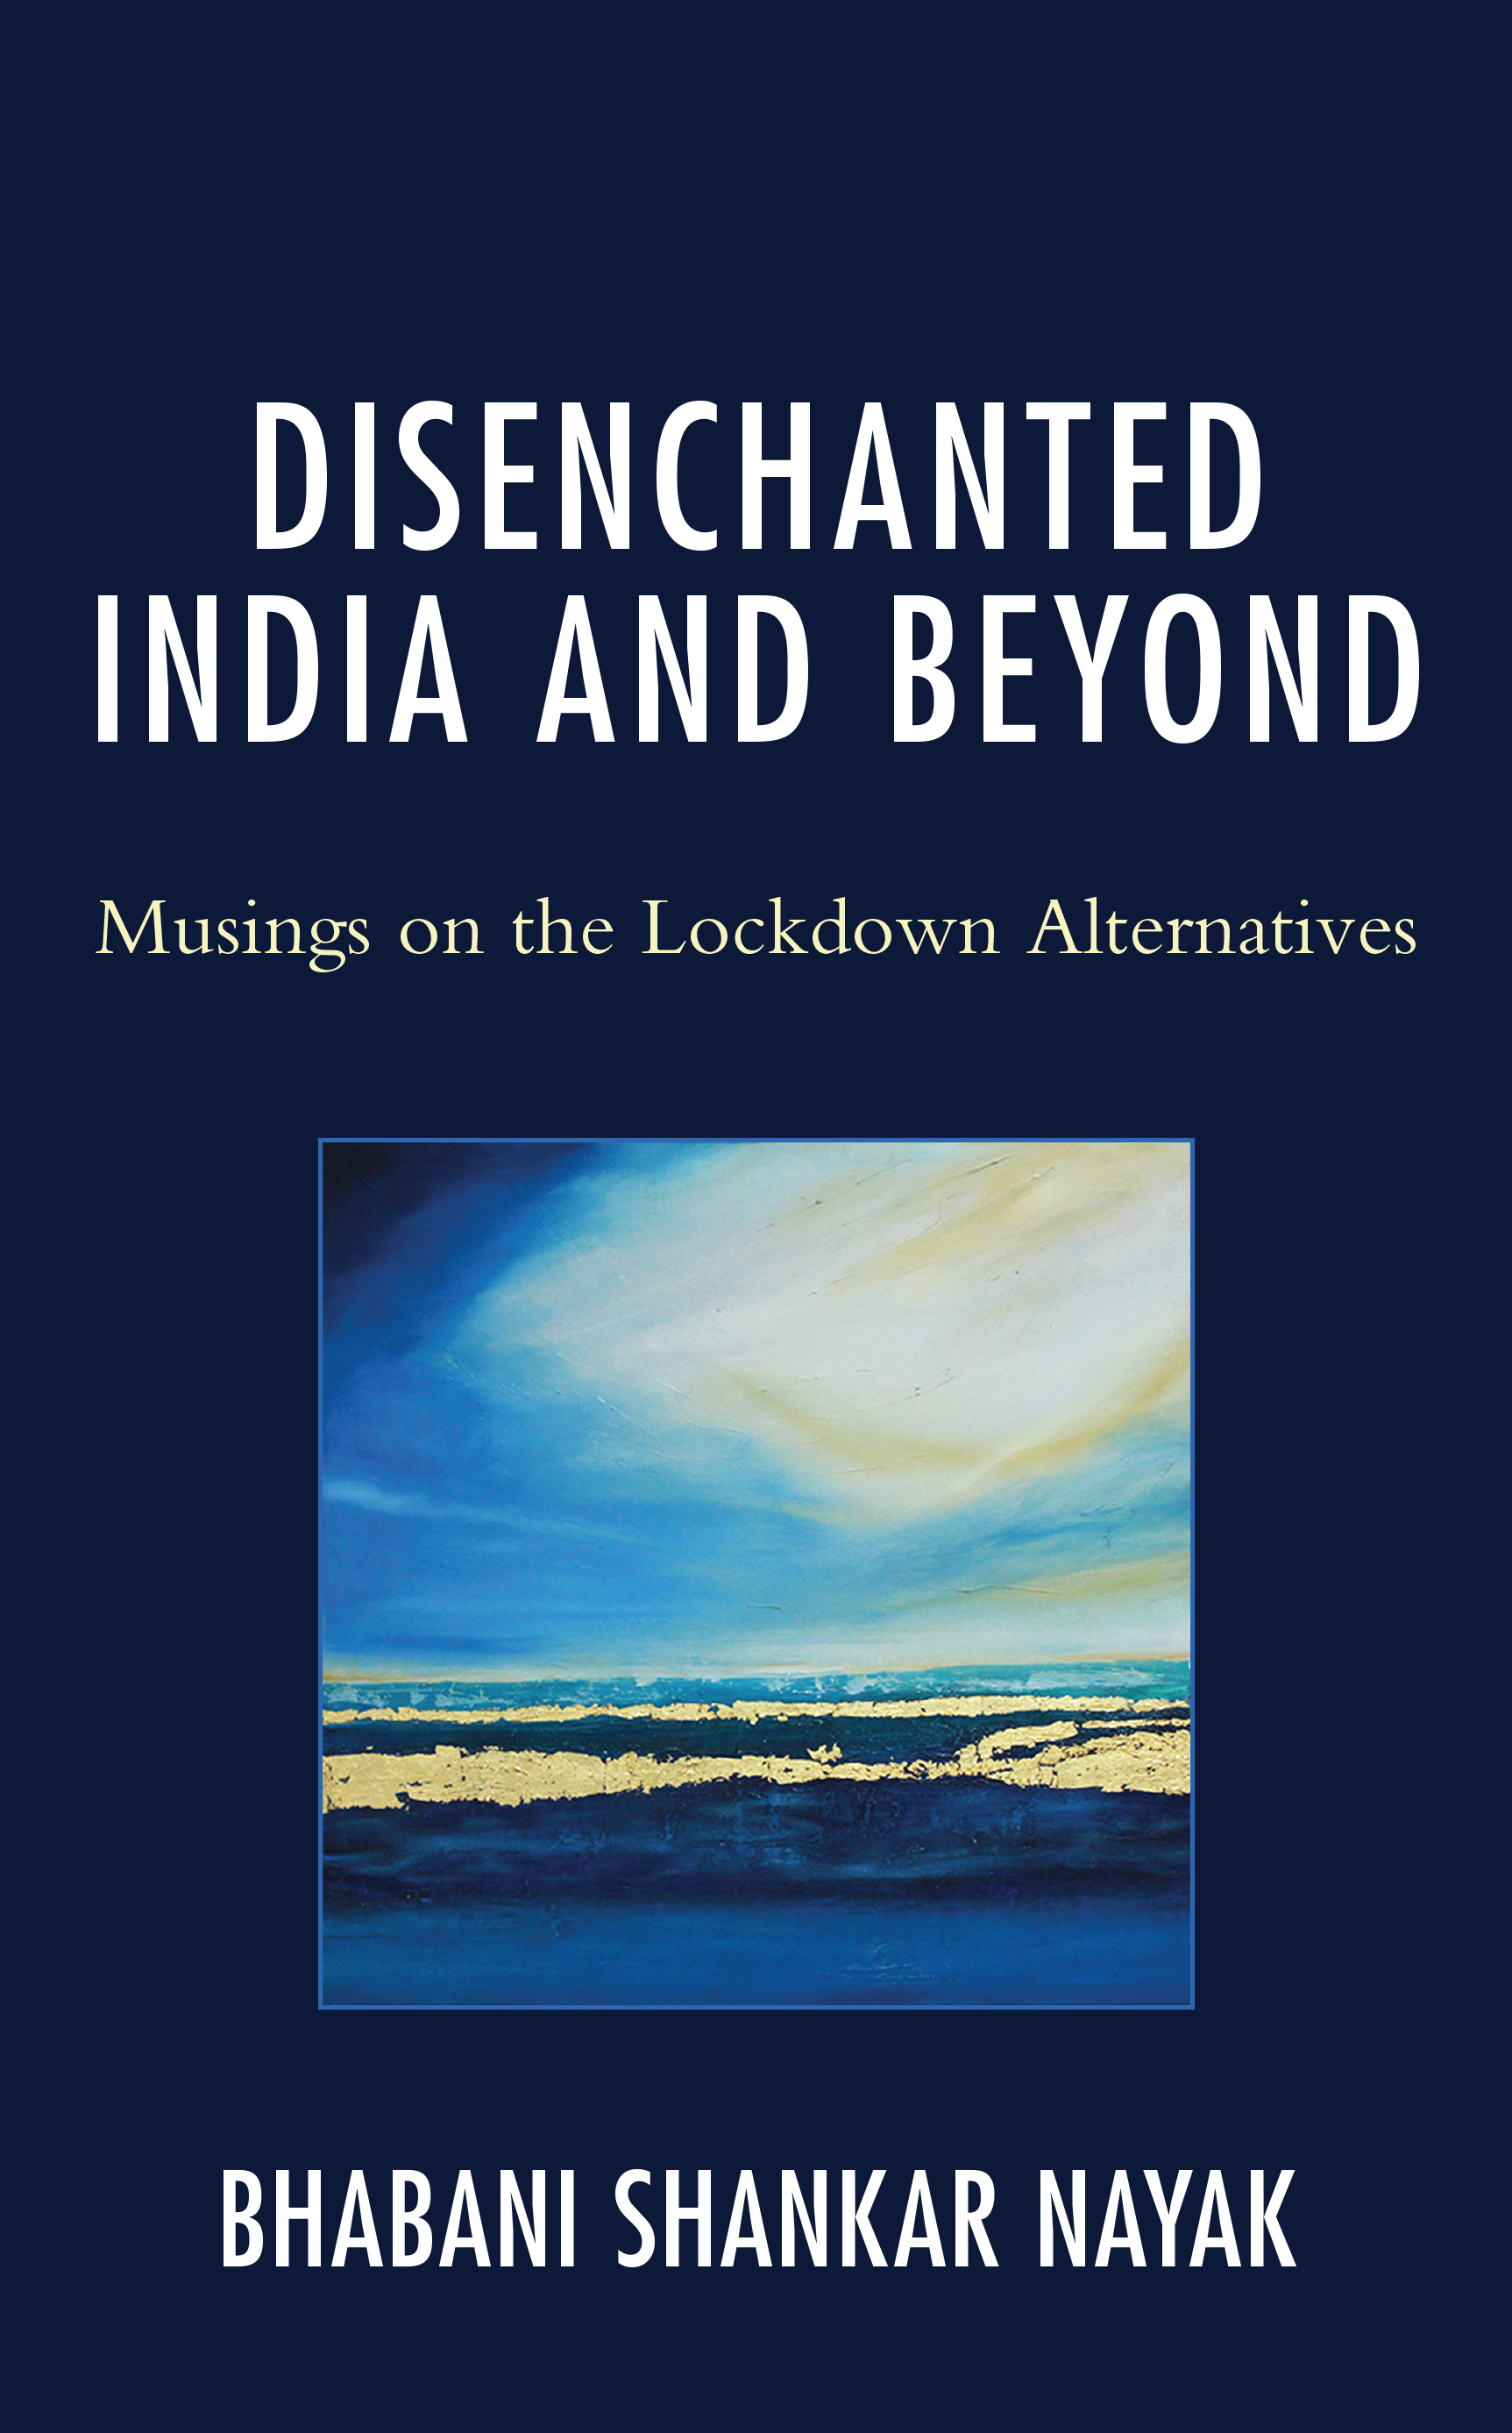 Disenchanted India and Beyond: Musings on the Lockdown Alternatives